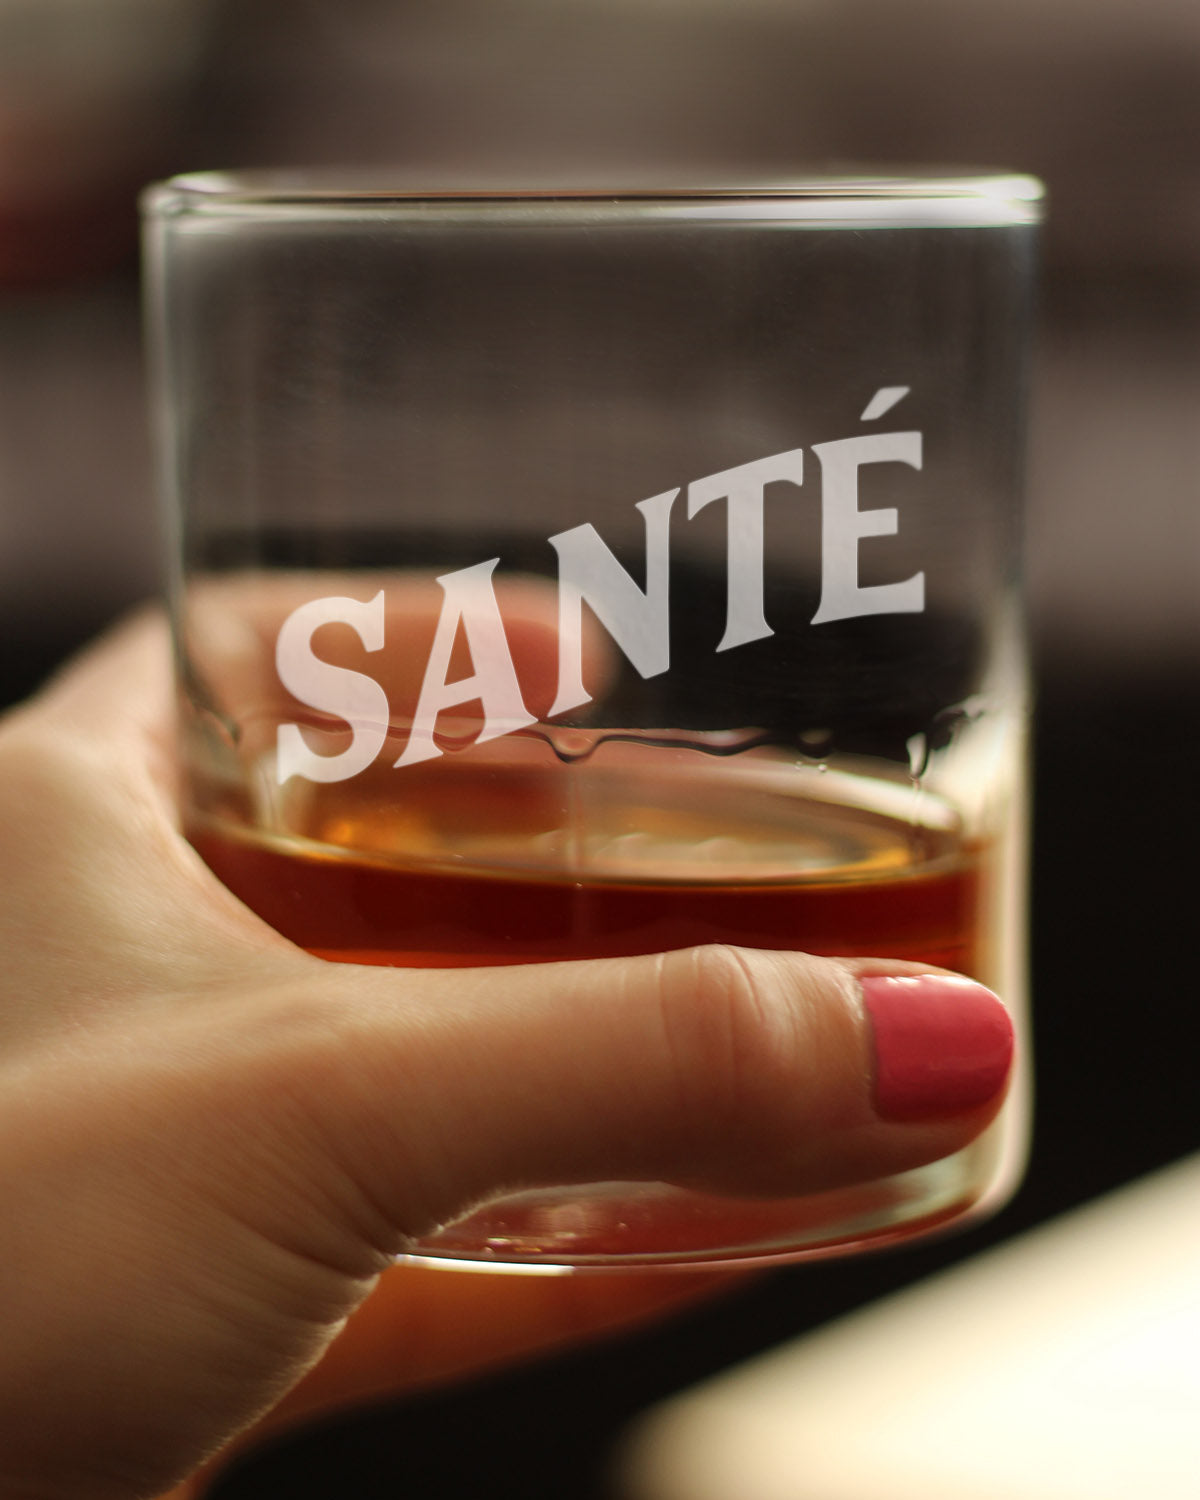 Sante - French Cheers - Whiskey Rocks Glass - Cute France Themed Gifts or Party Decor for Women and Men - 10.25 Oz